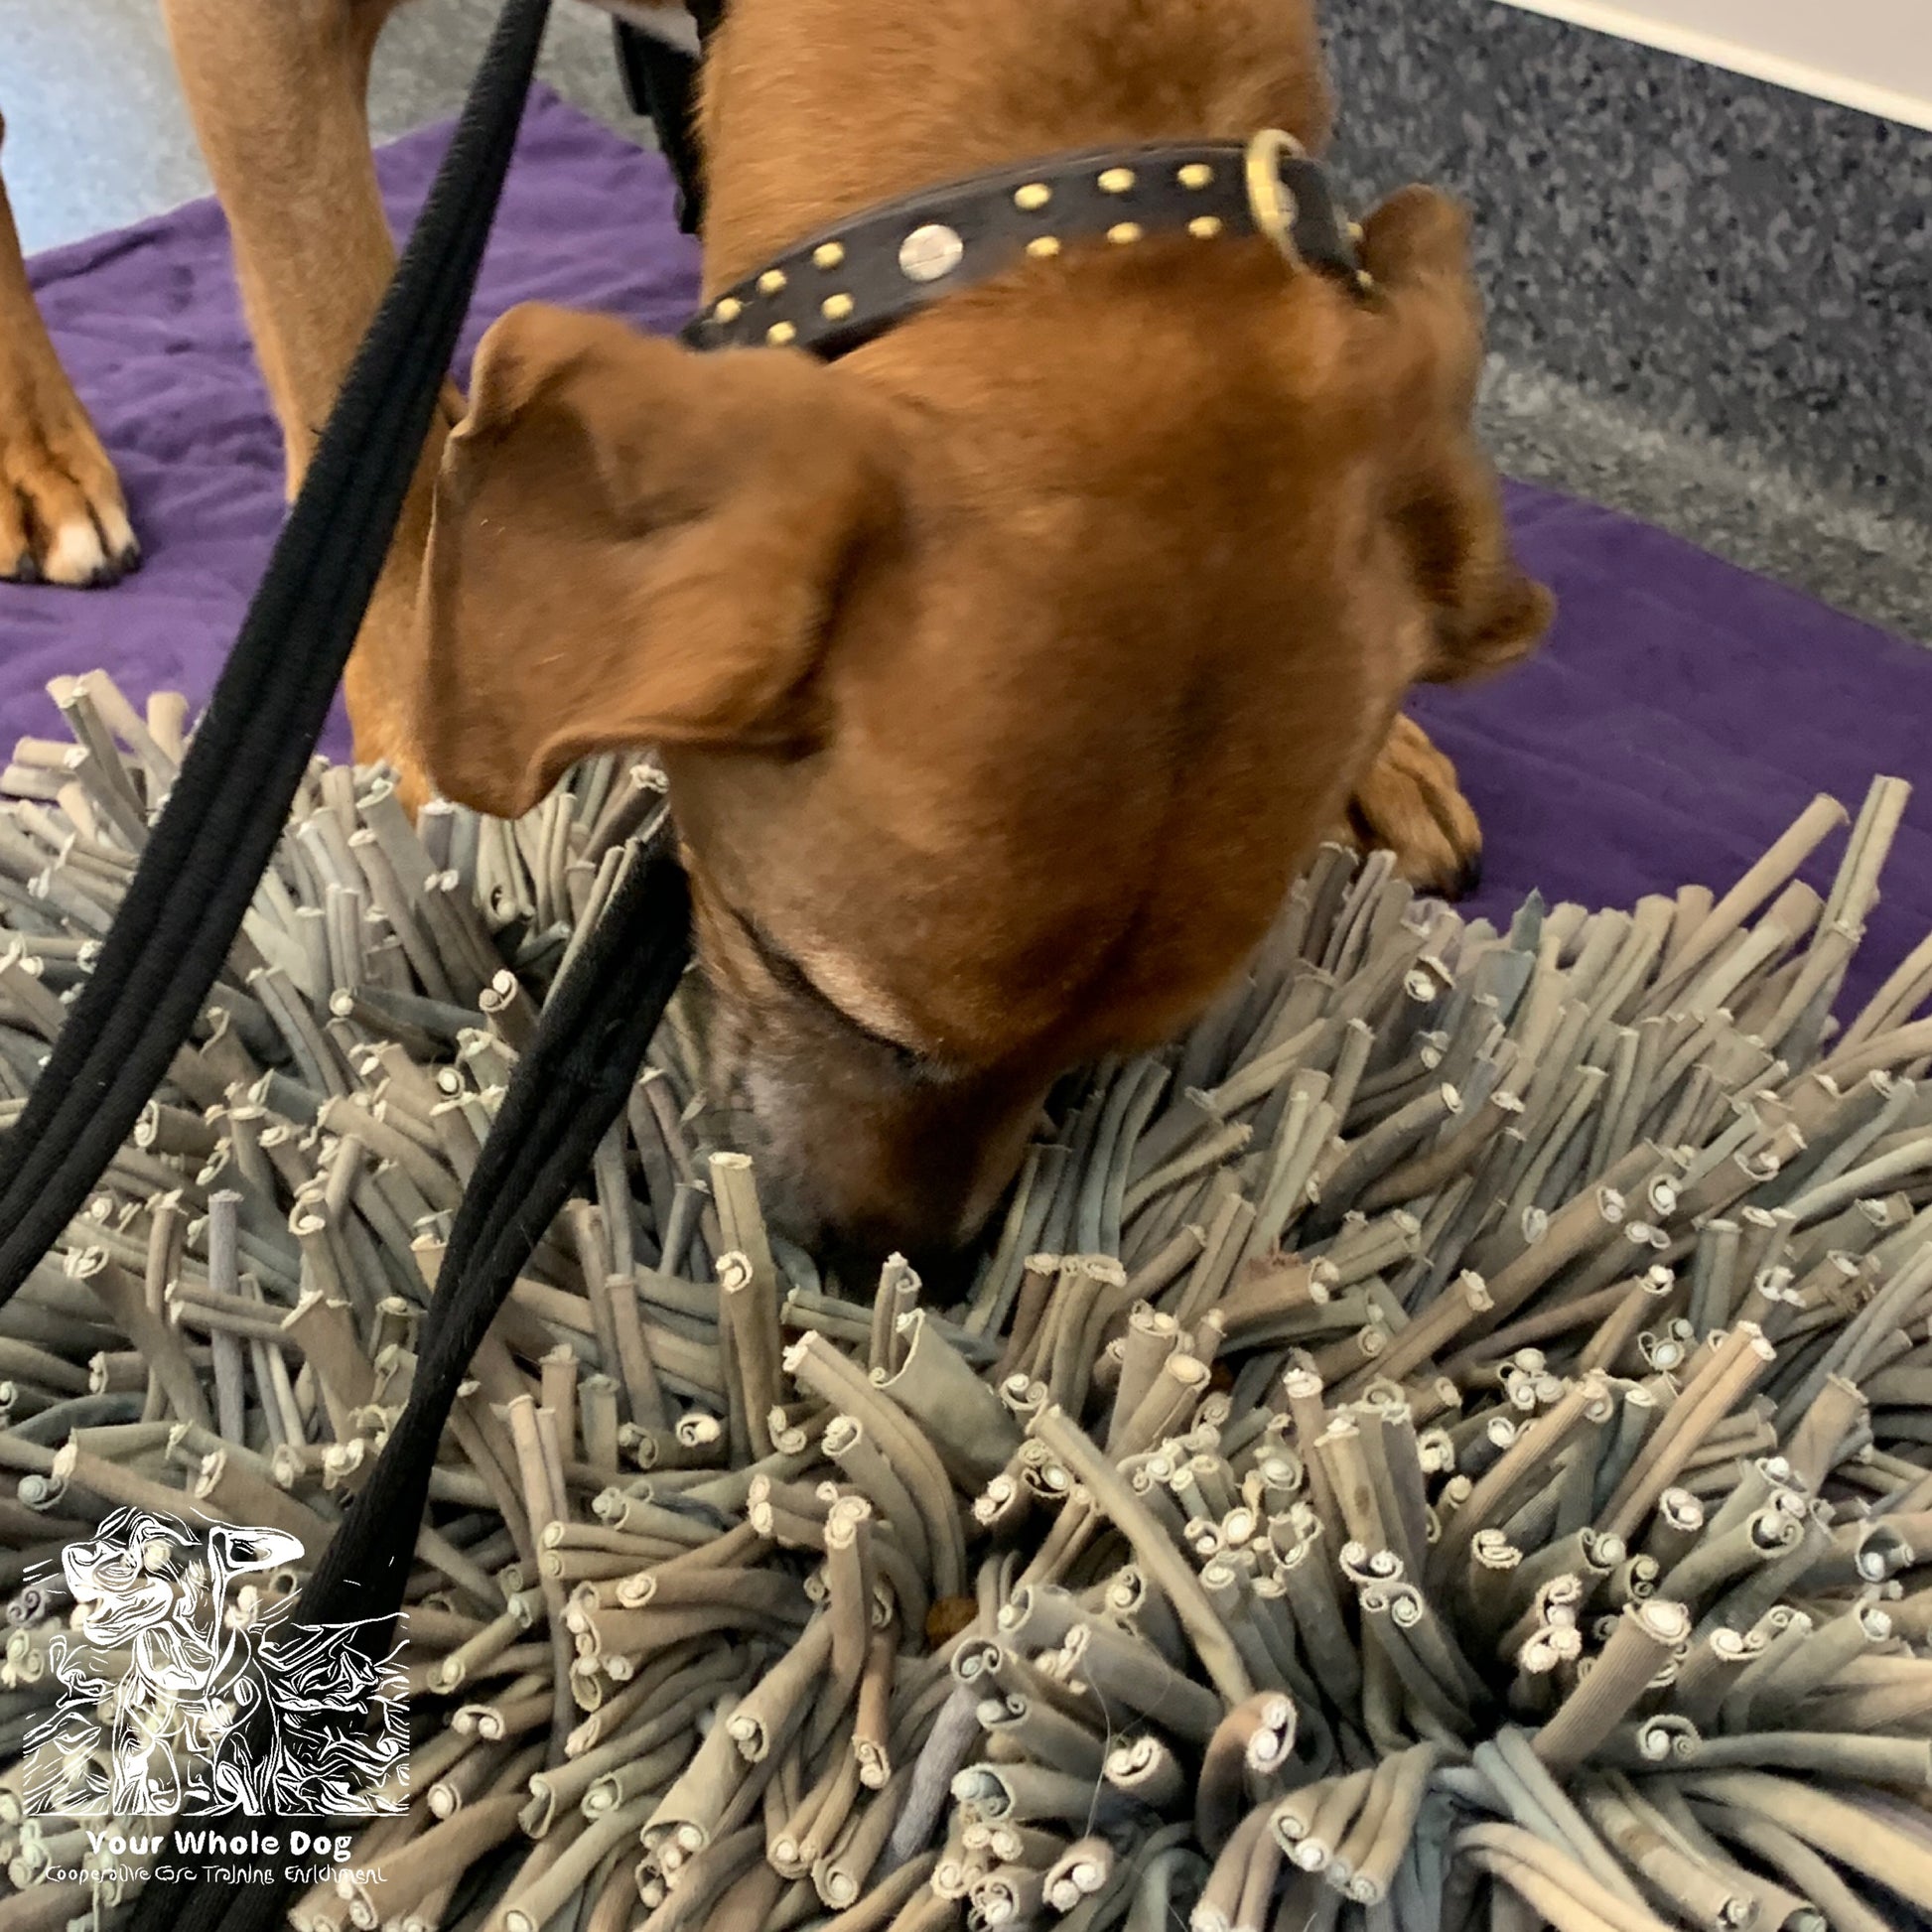 A brown dog sniffing a Paw5 Wooly Snuffle Mat with a leash attached to it. Brand Name: Your Whole Dog.